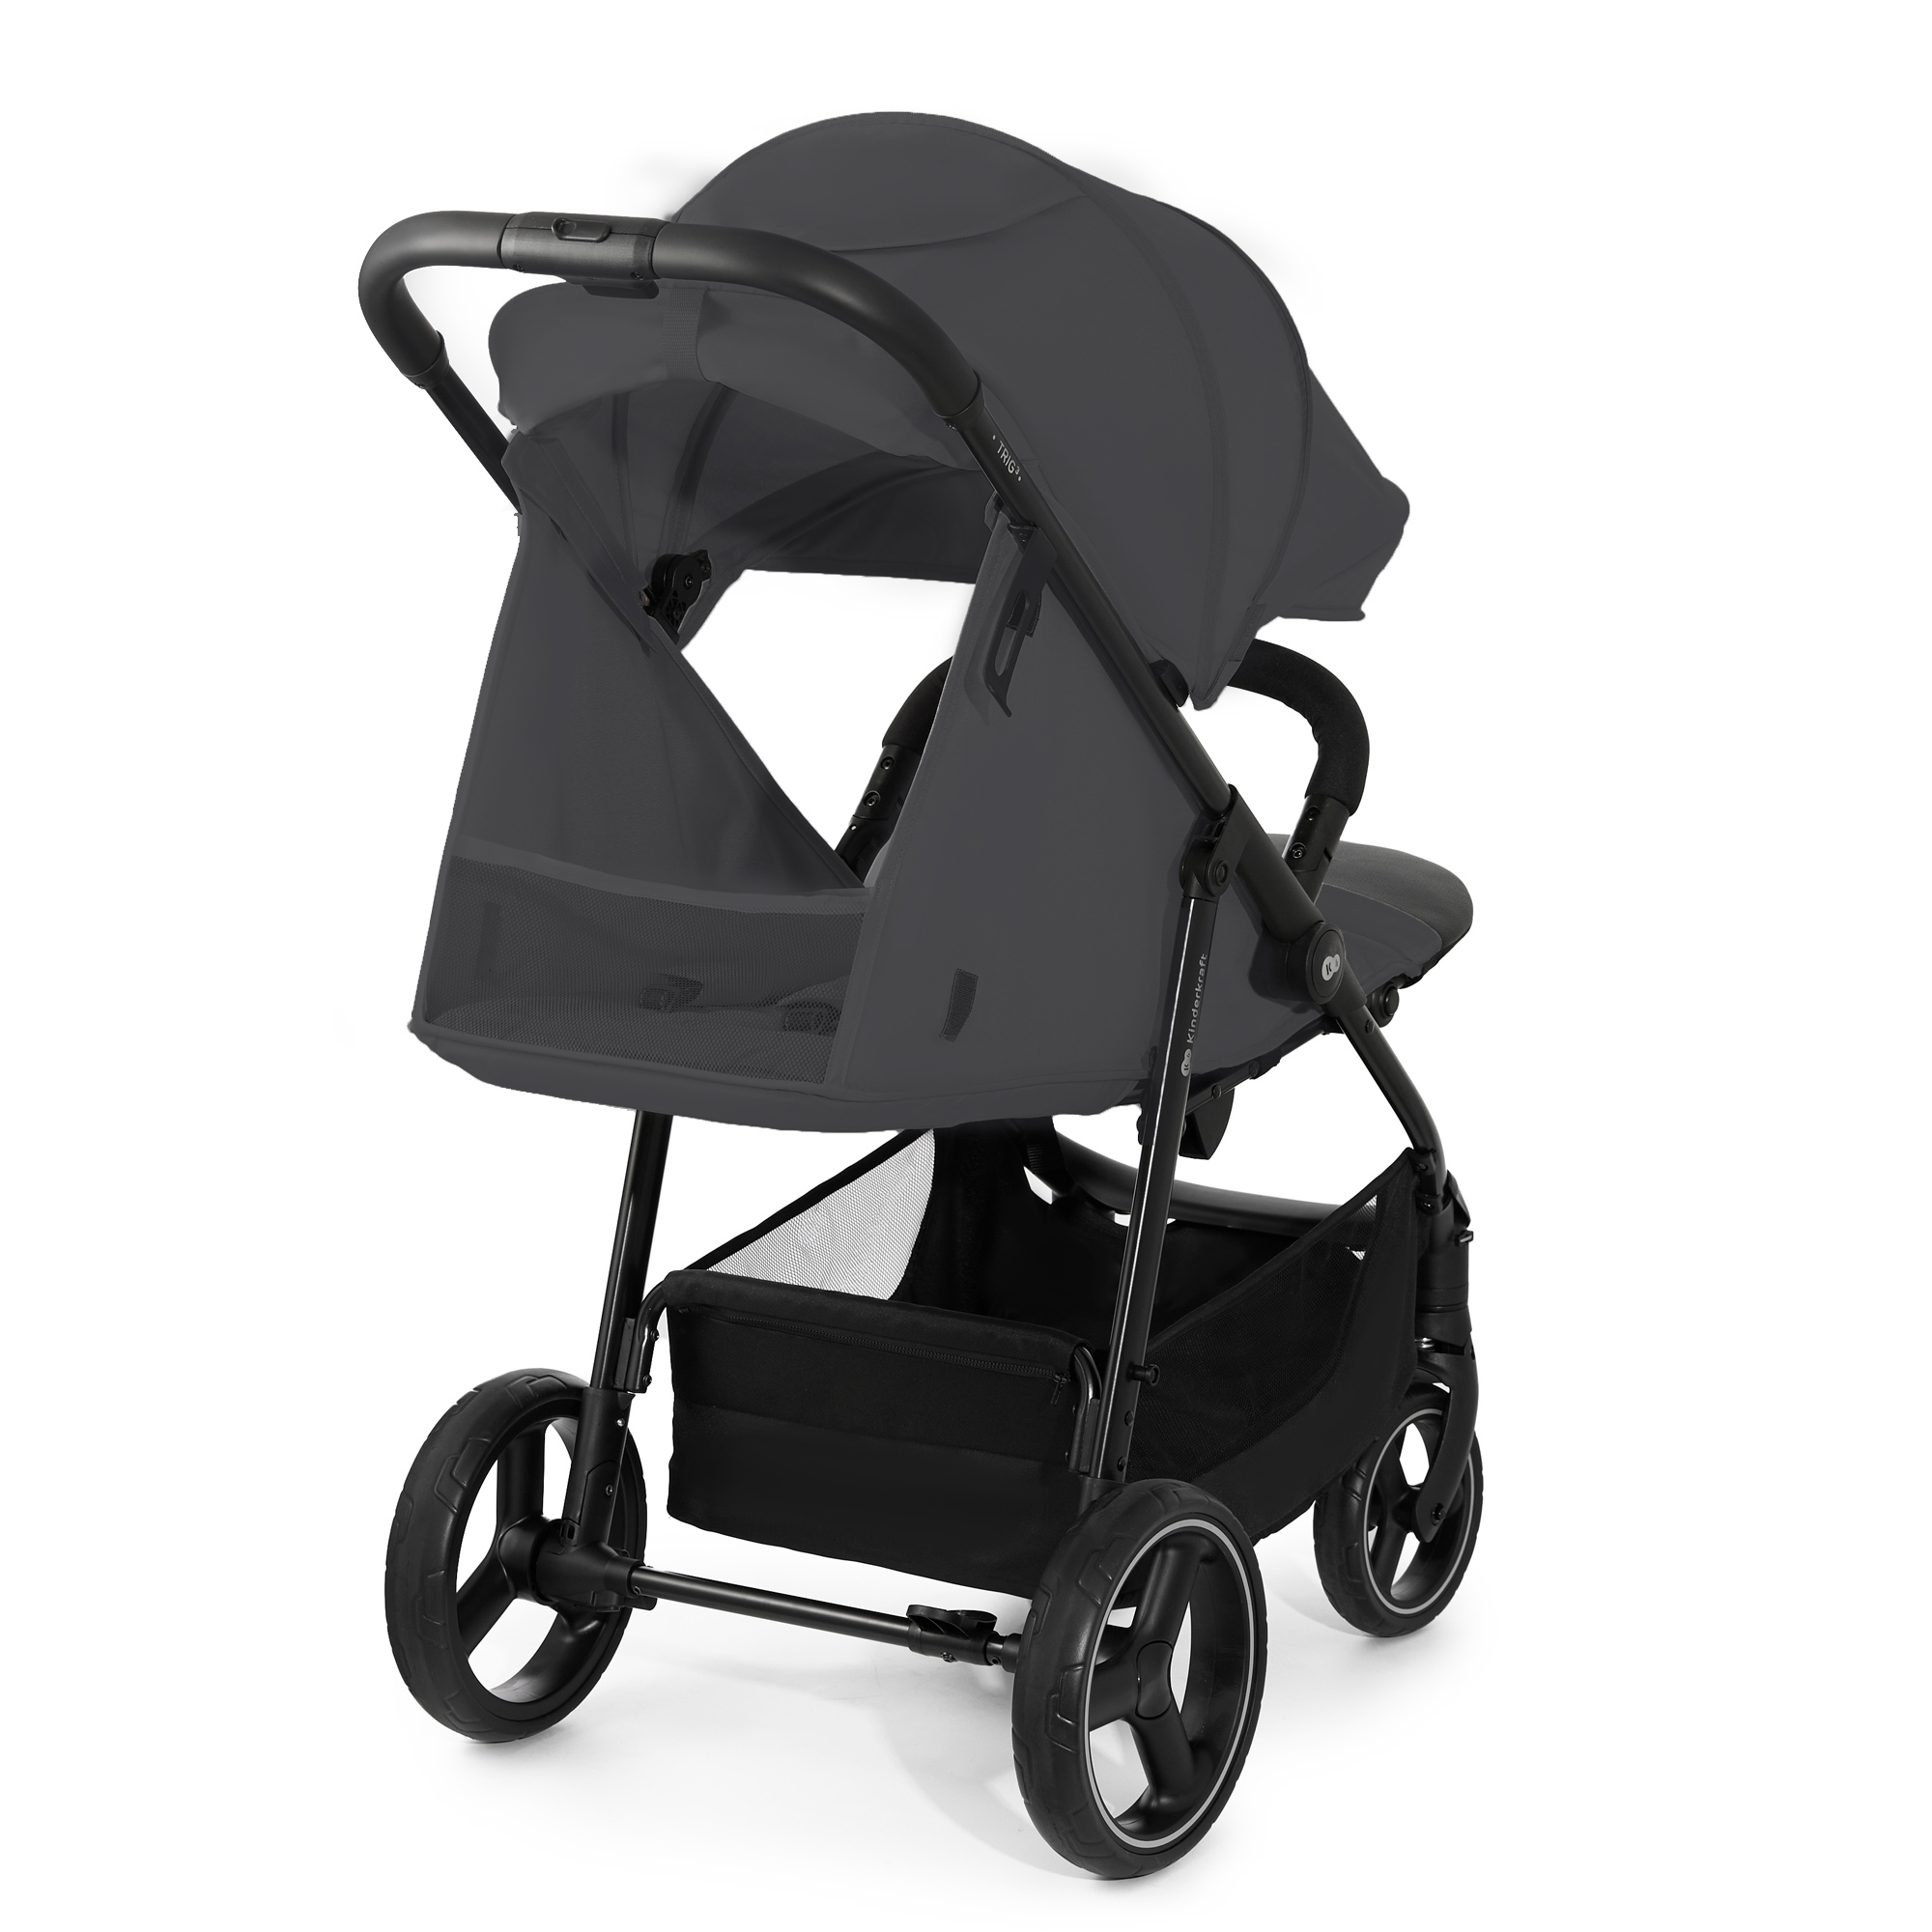 A stroller for every day and for trips